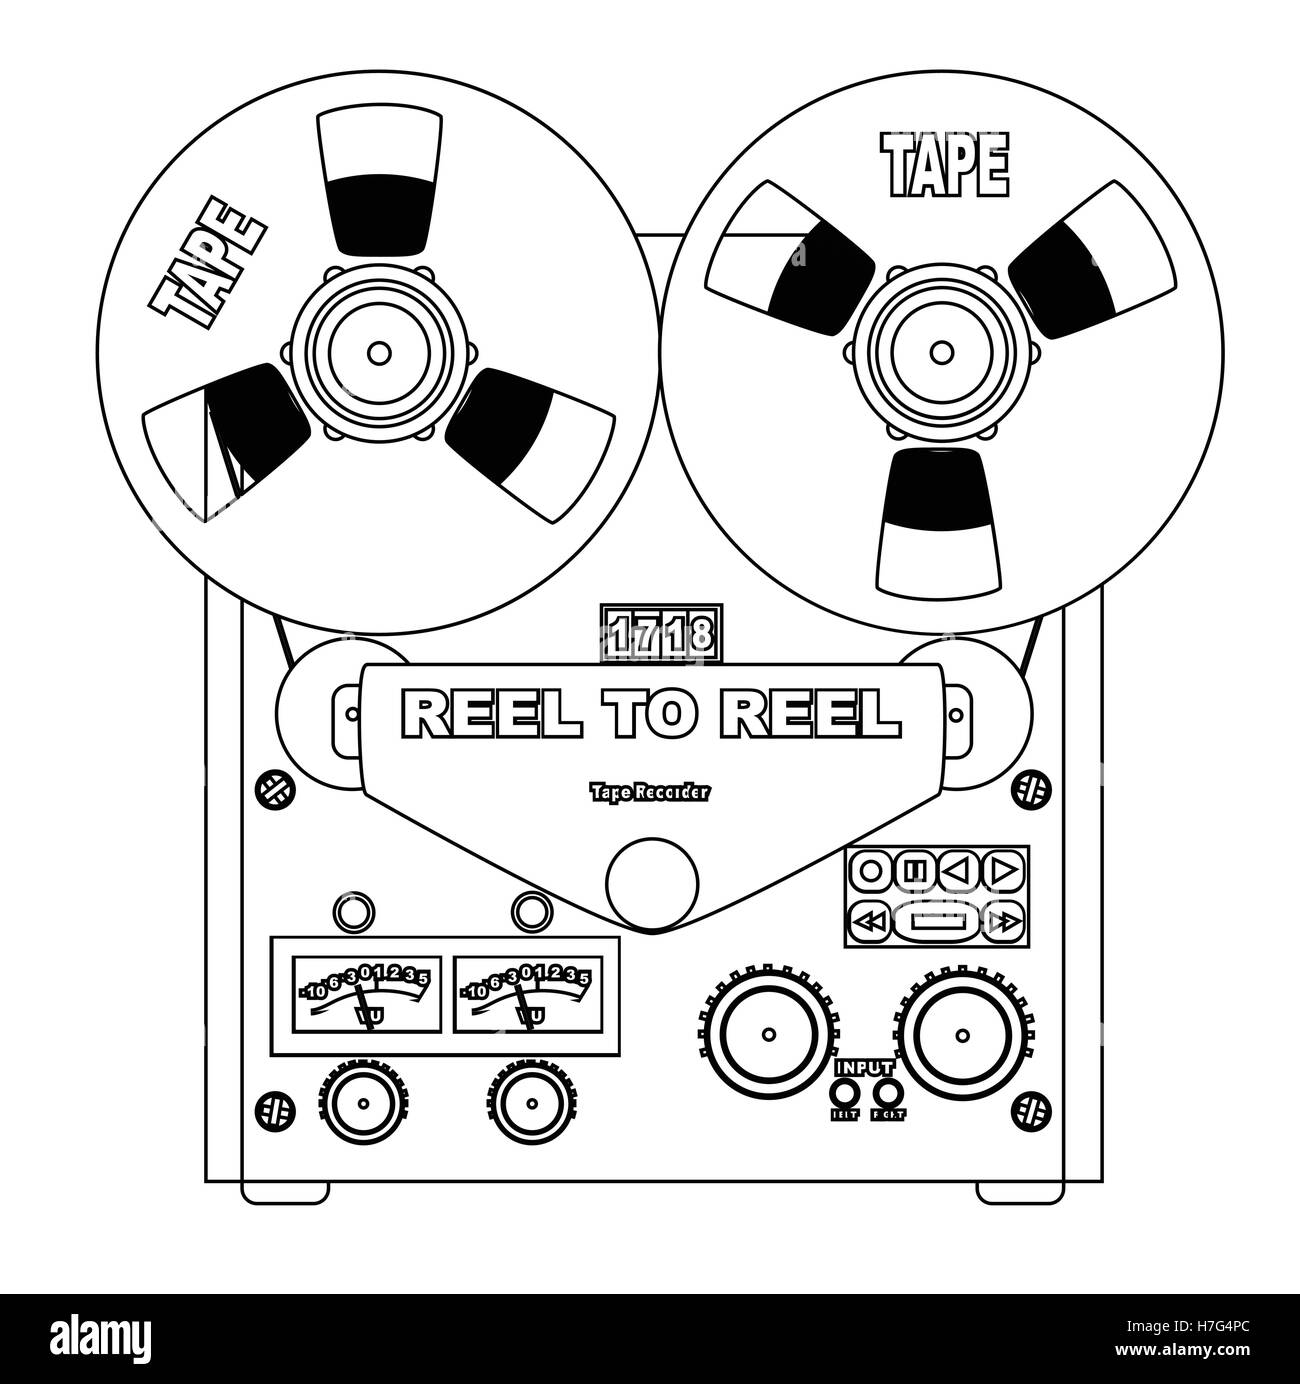 A typical reel to reel half inch stereo master tape recorder Stock